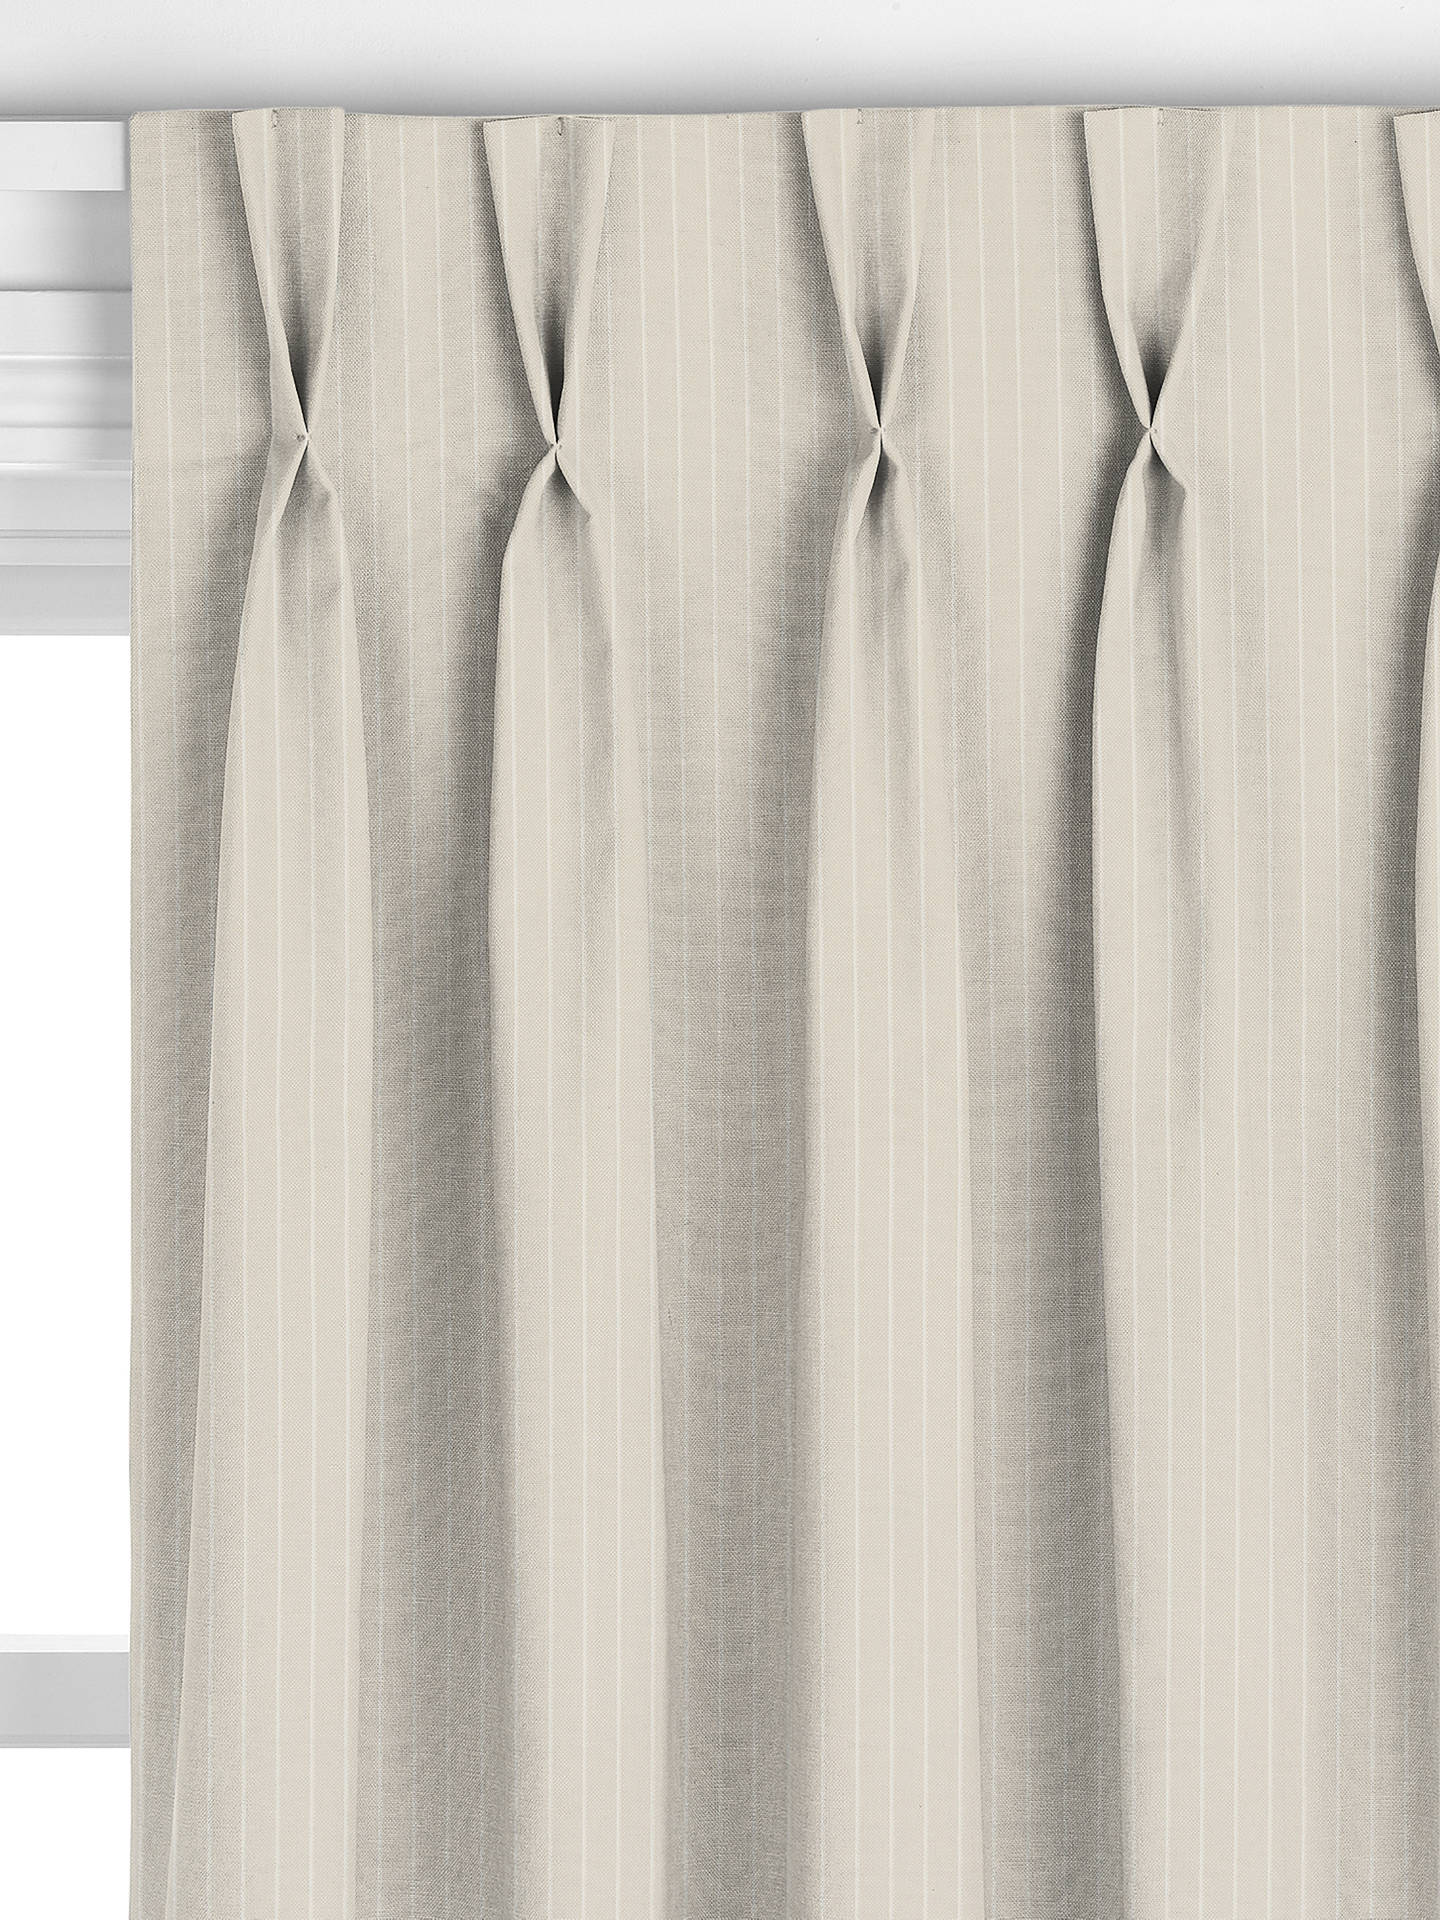 John Lewis Cotton Woven Stripe Made to Measure Curtains, White/Storm, Natural